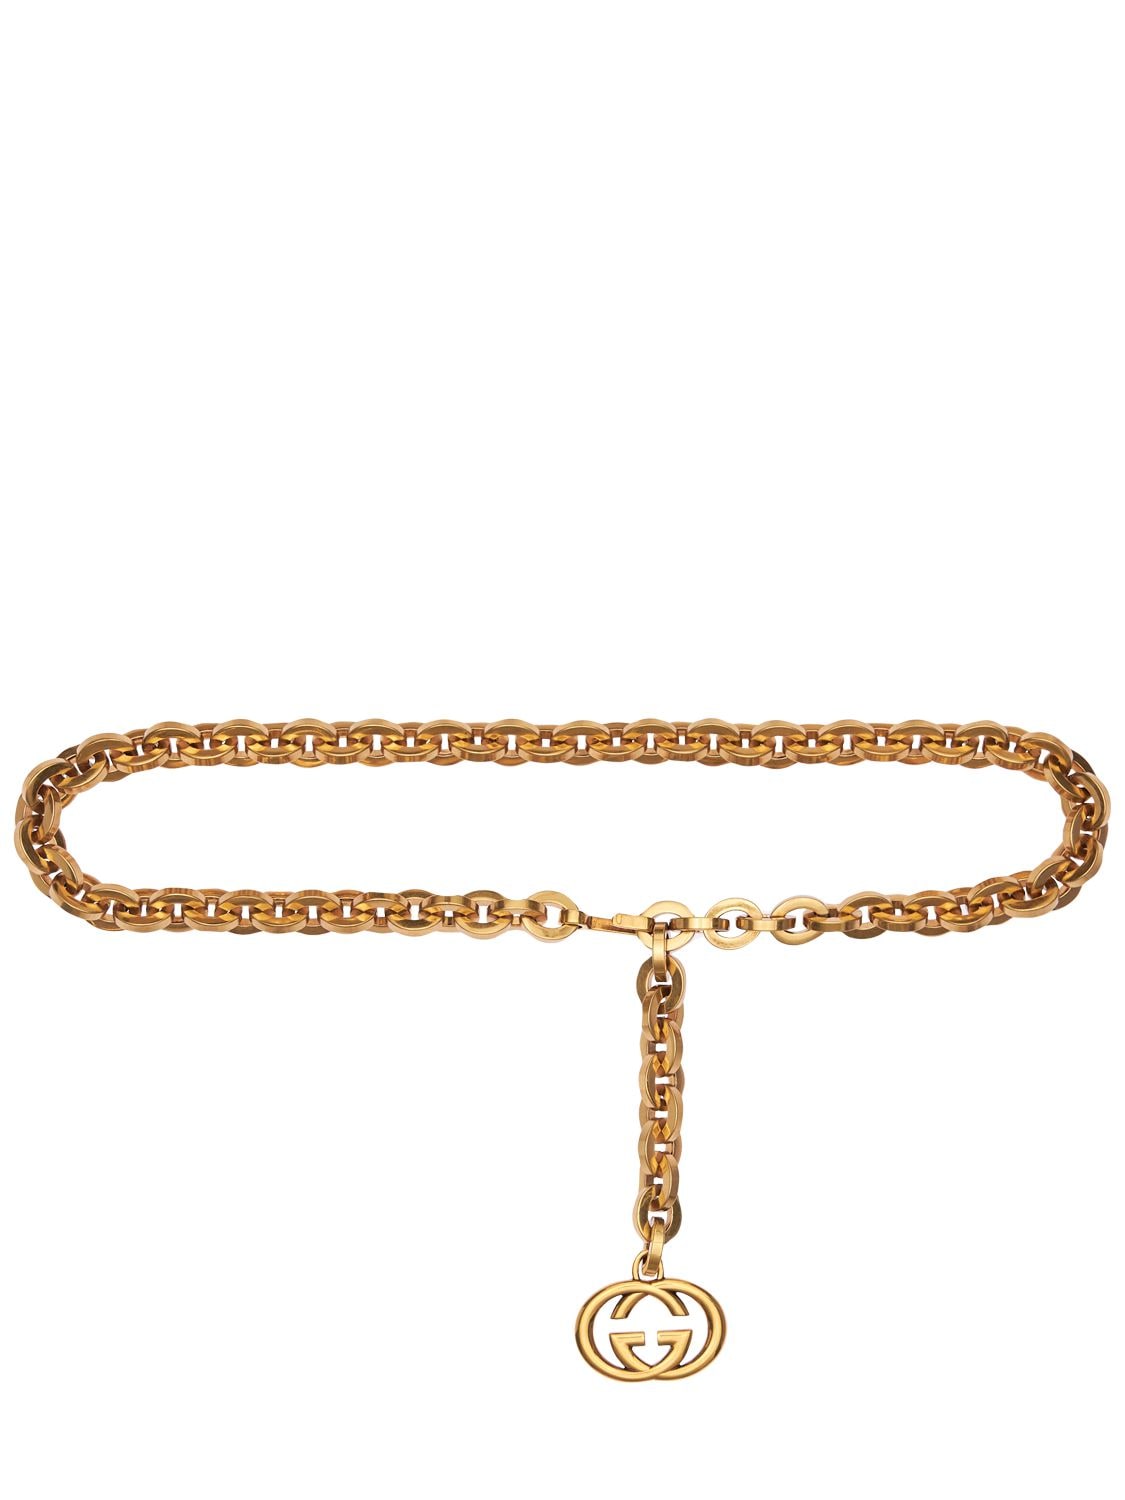 Chain Belt With Interlocking G Charm In Gold-Toned Metal